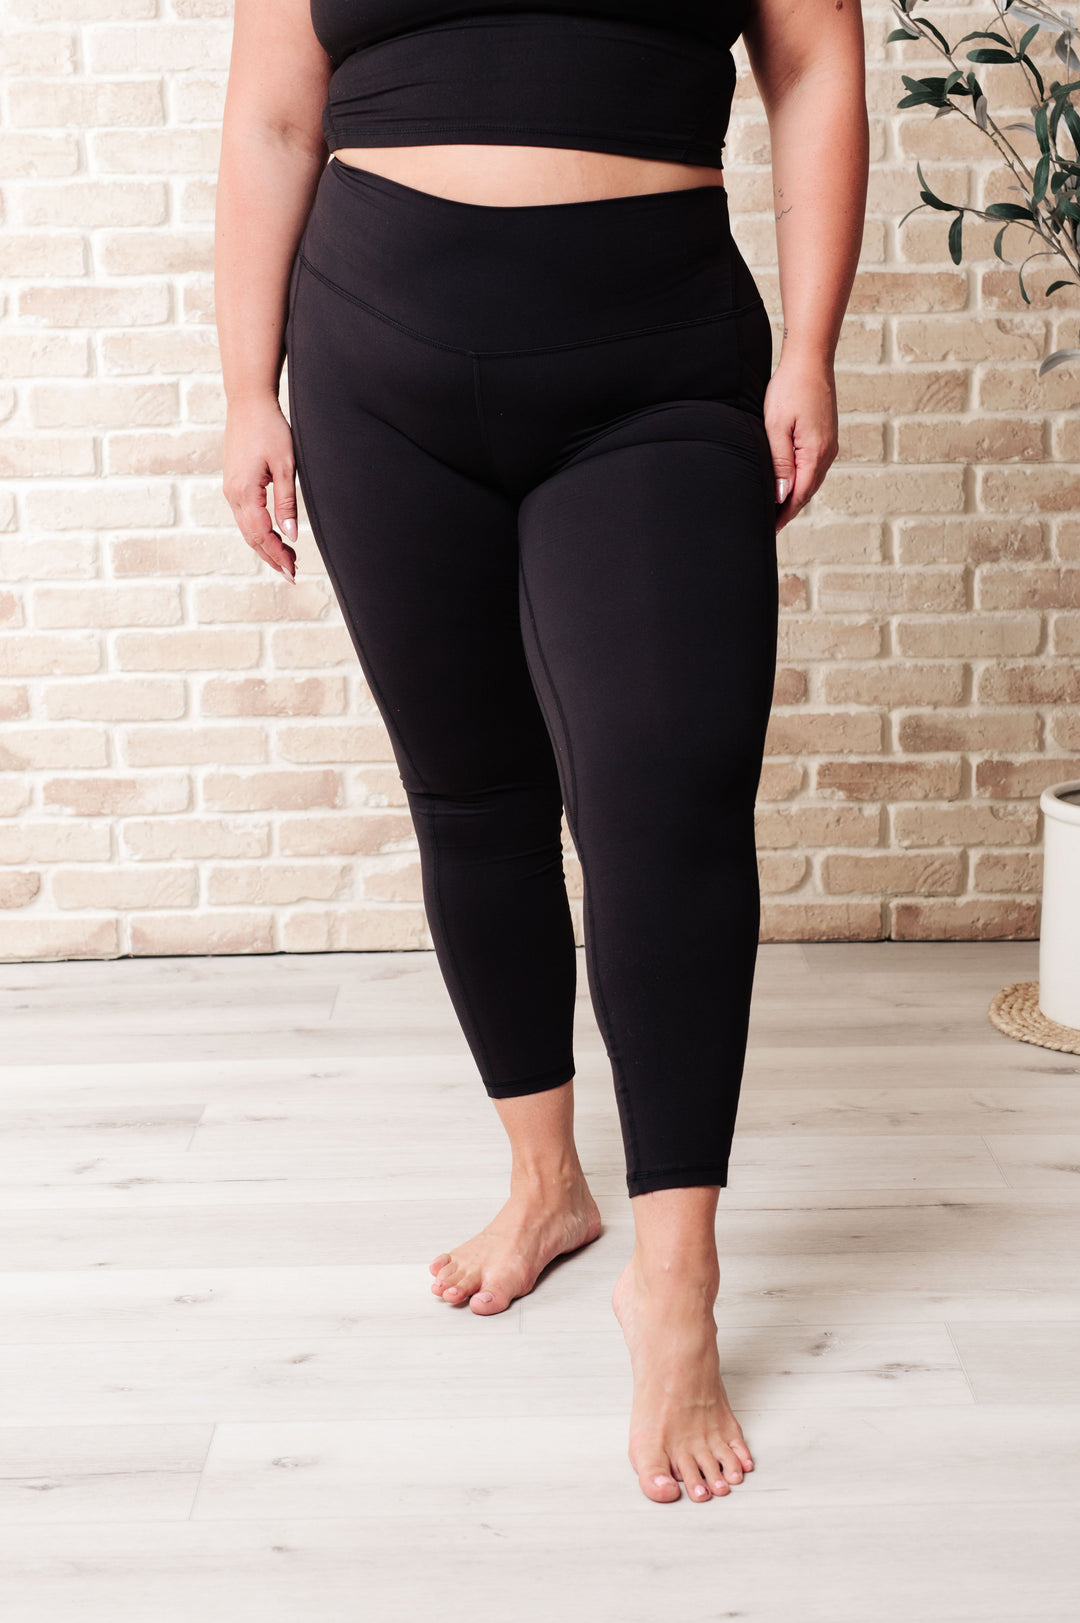 Somewhere to Start Leggings in Black-Leggings-Inspired by Justeen-Women's Clothing Boutique